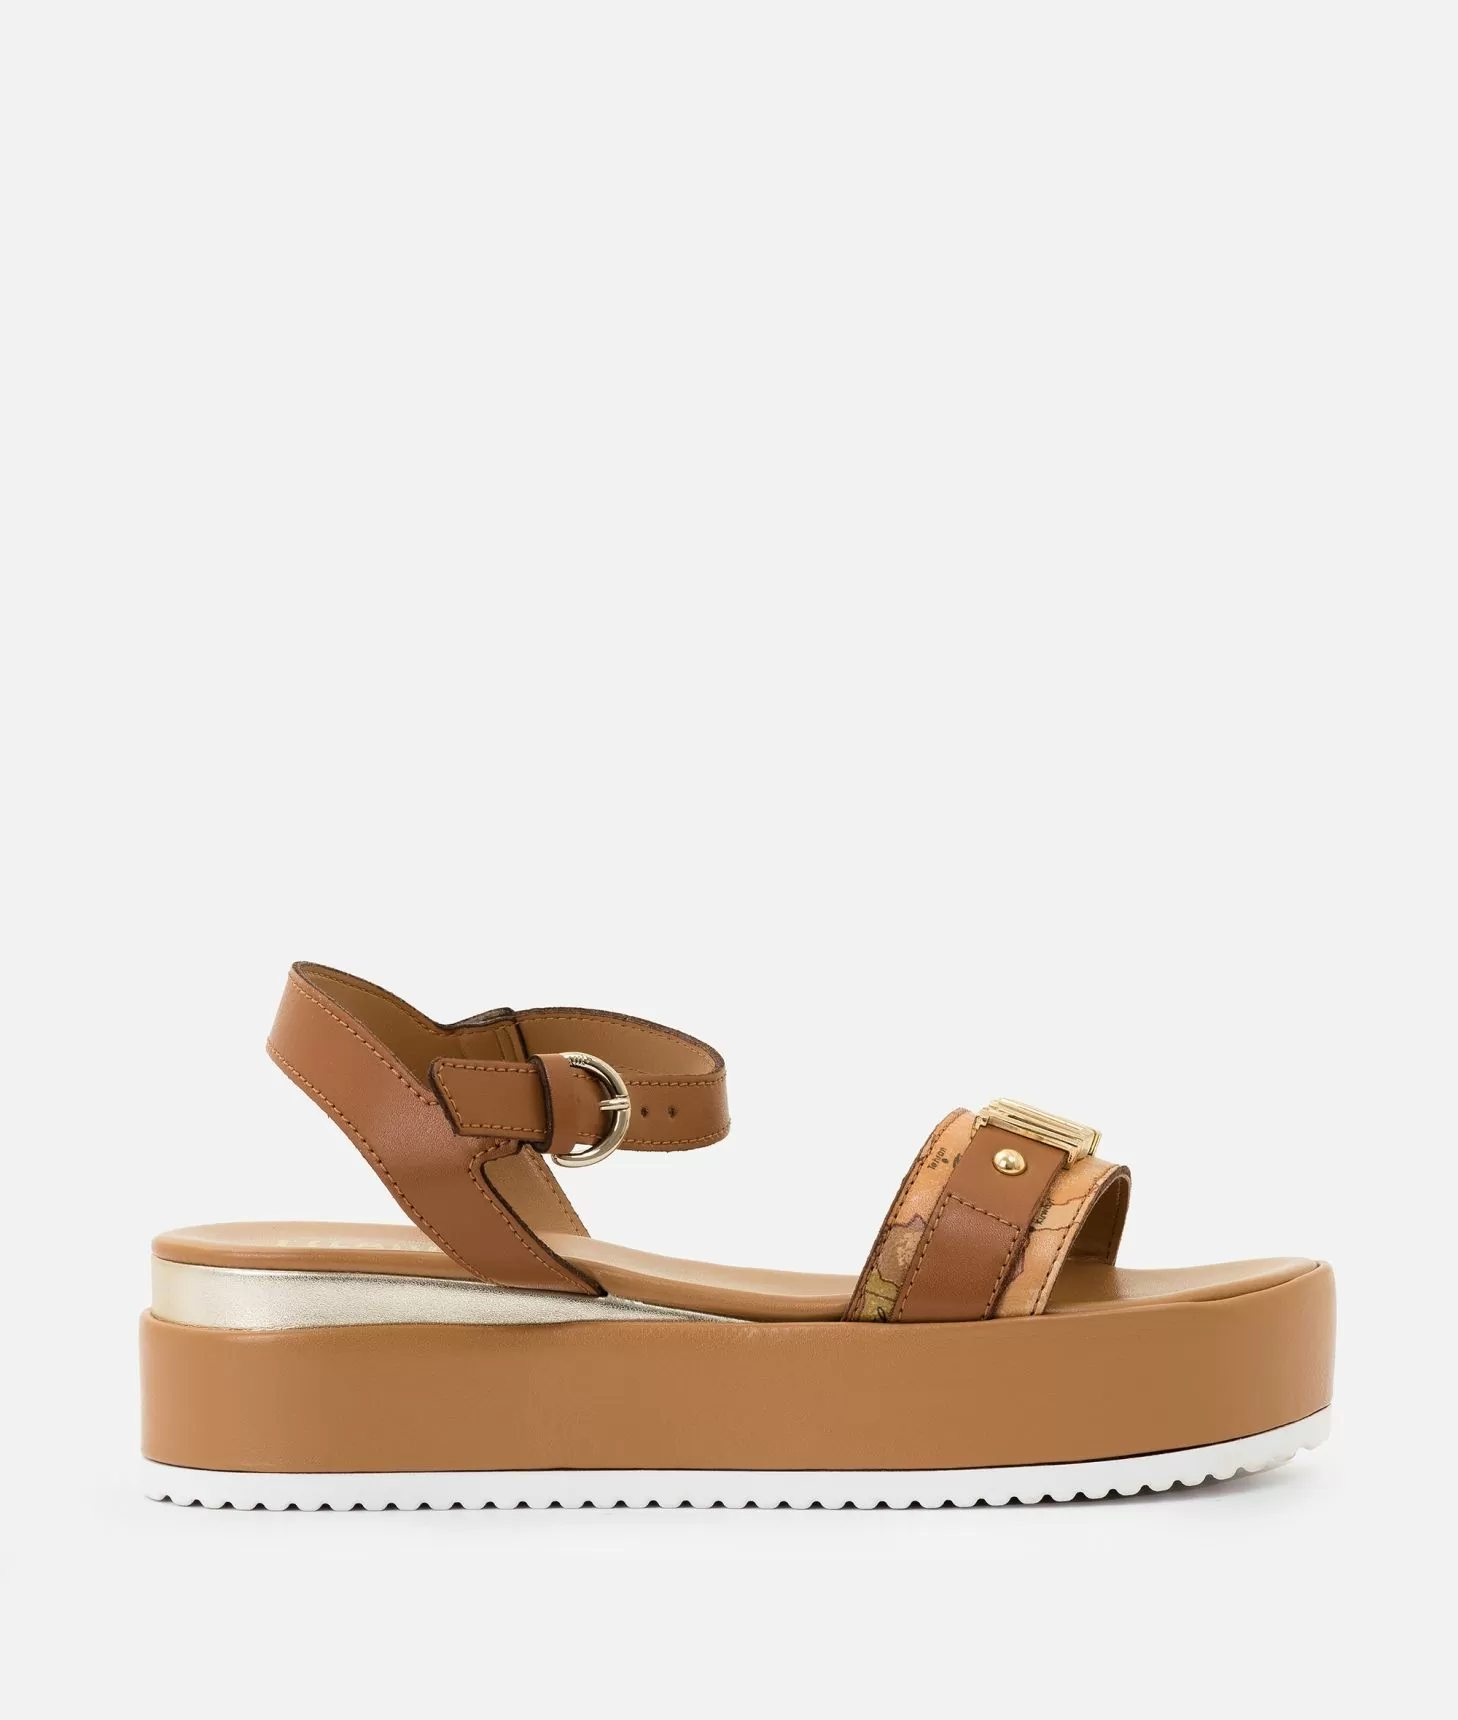 ALVIERO MARTINI PRIMA CLASSE - Wedge sandal in smooth cowhide leather Brown